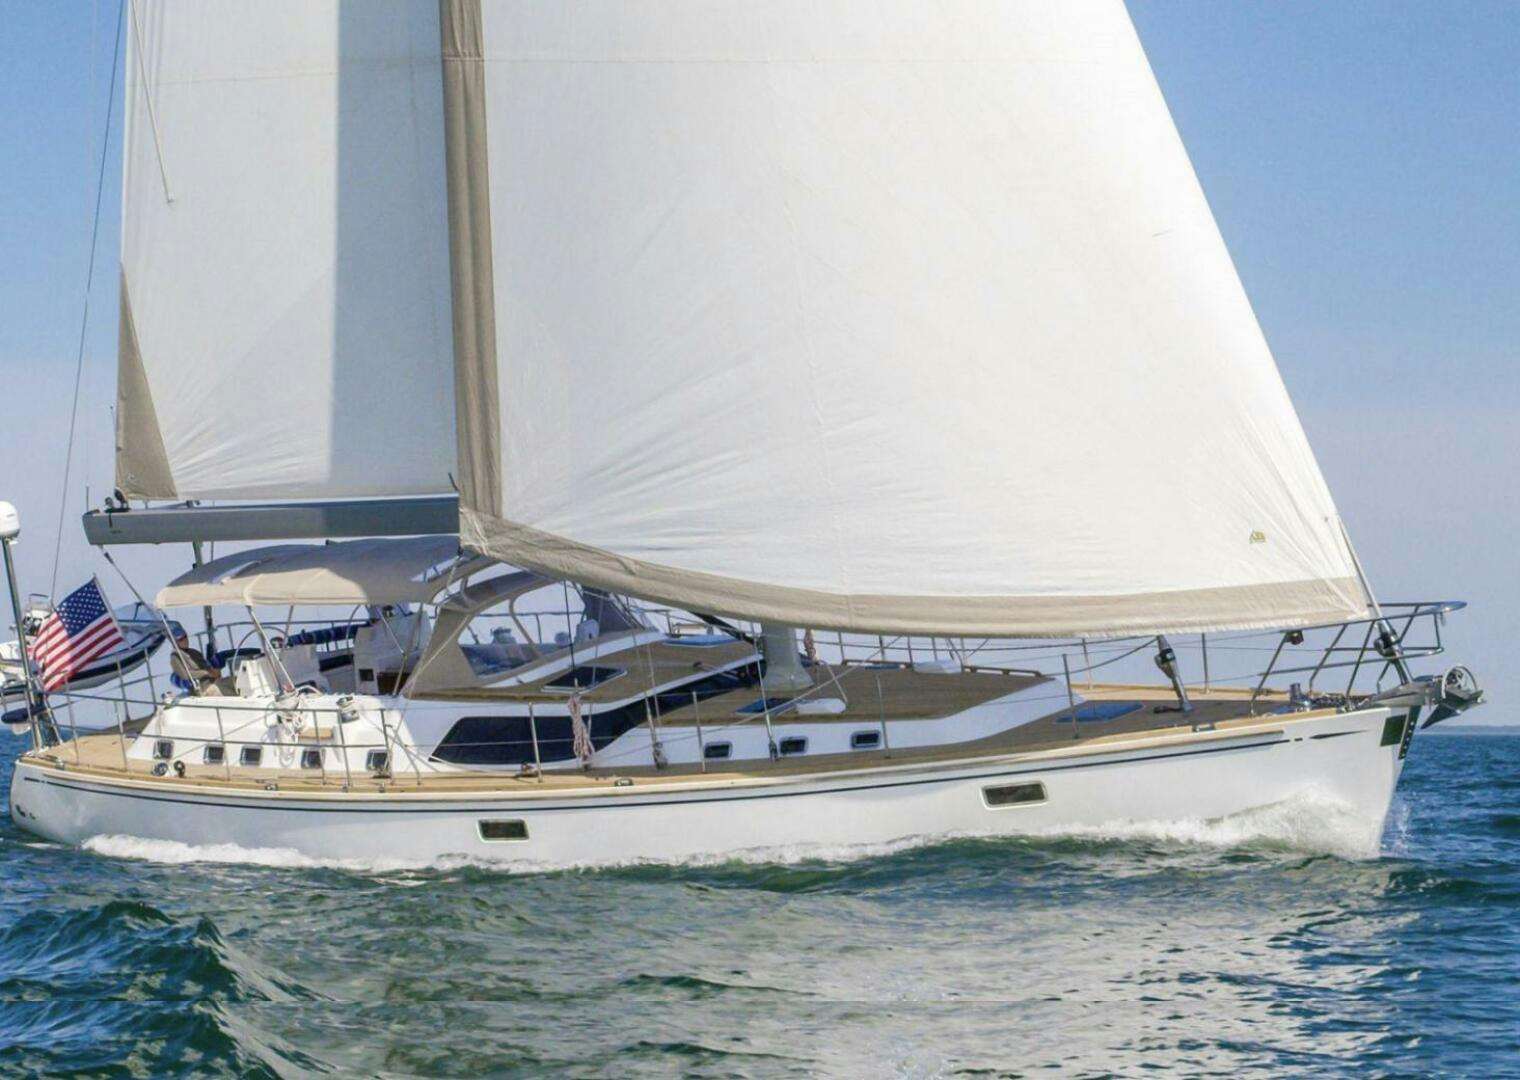 Indepepdence
Yacht for Sale